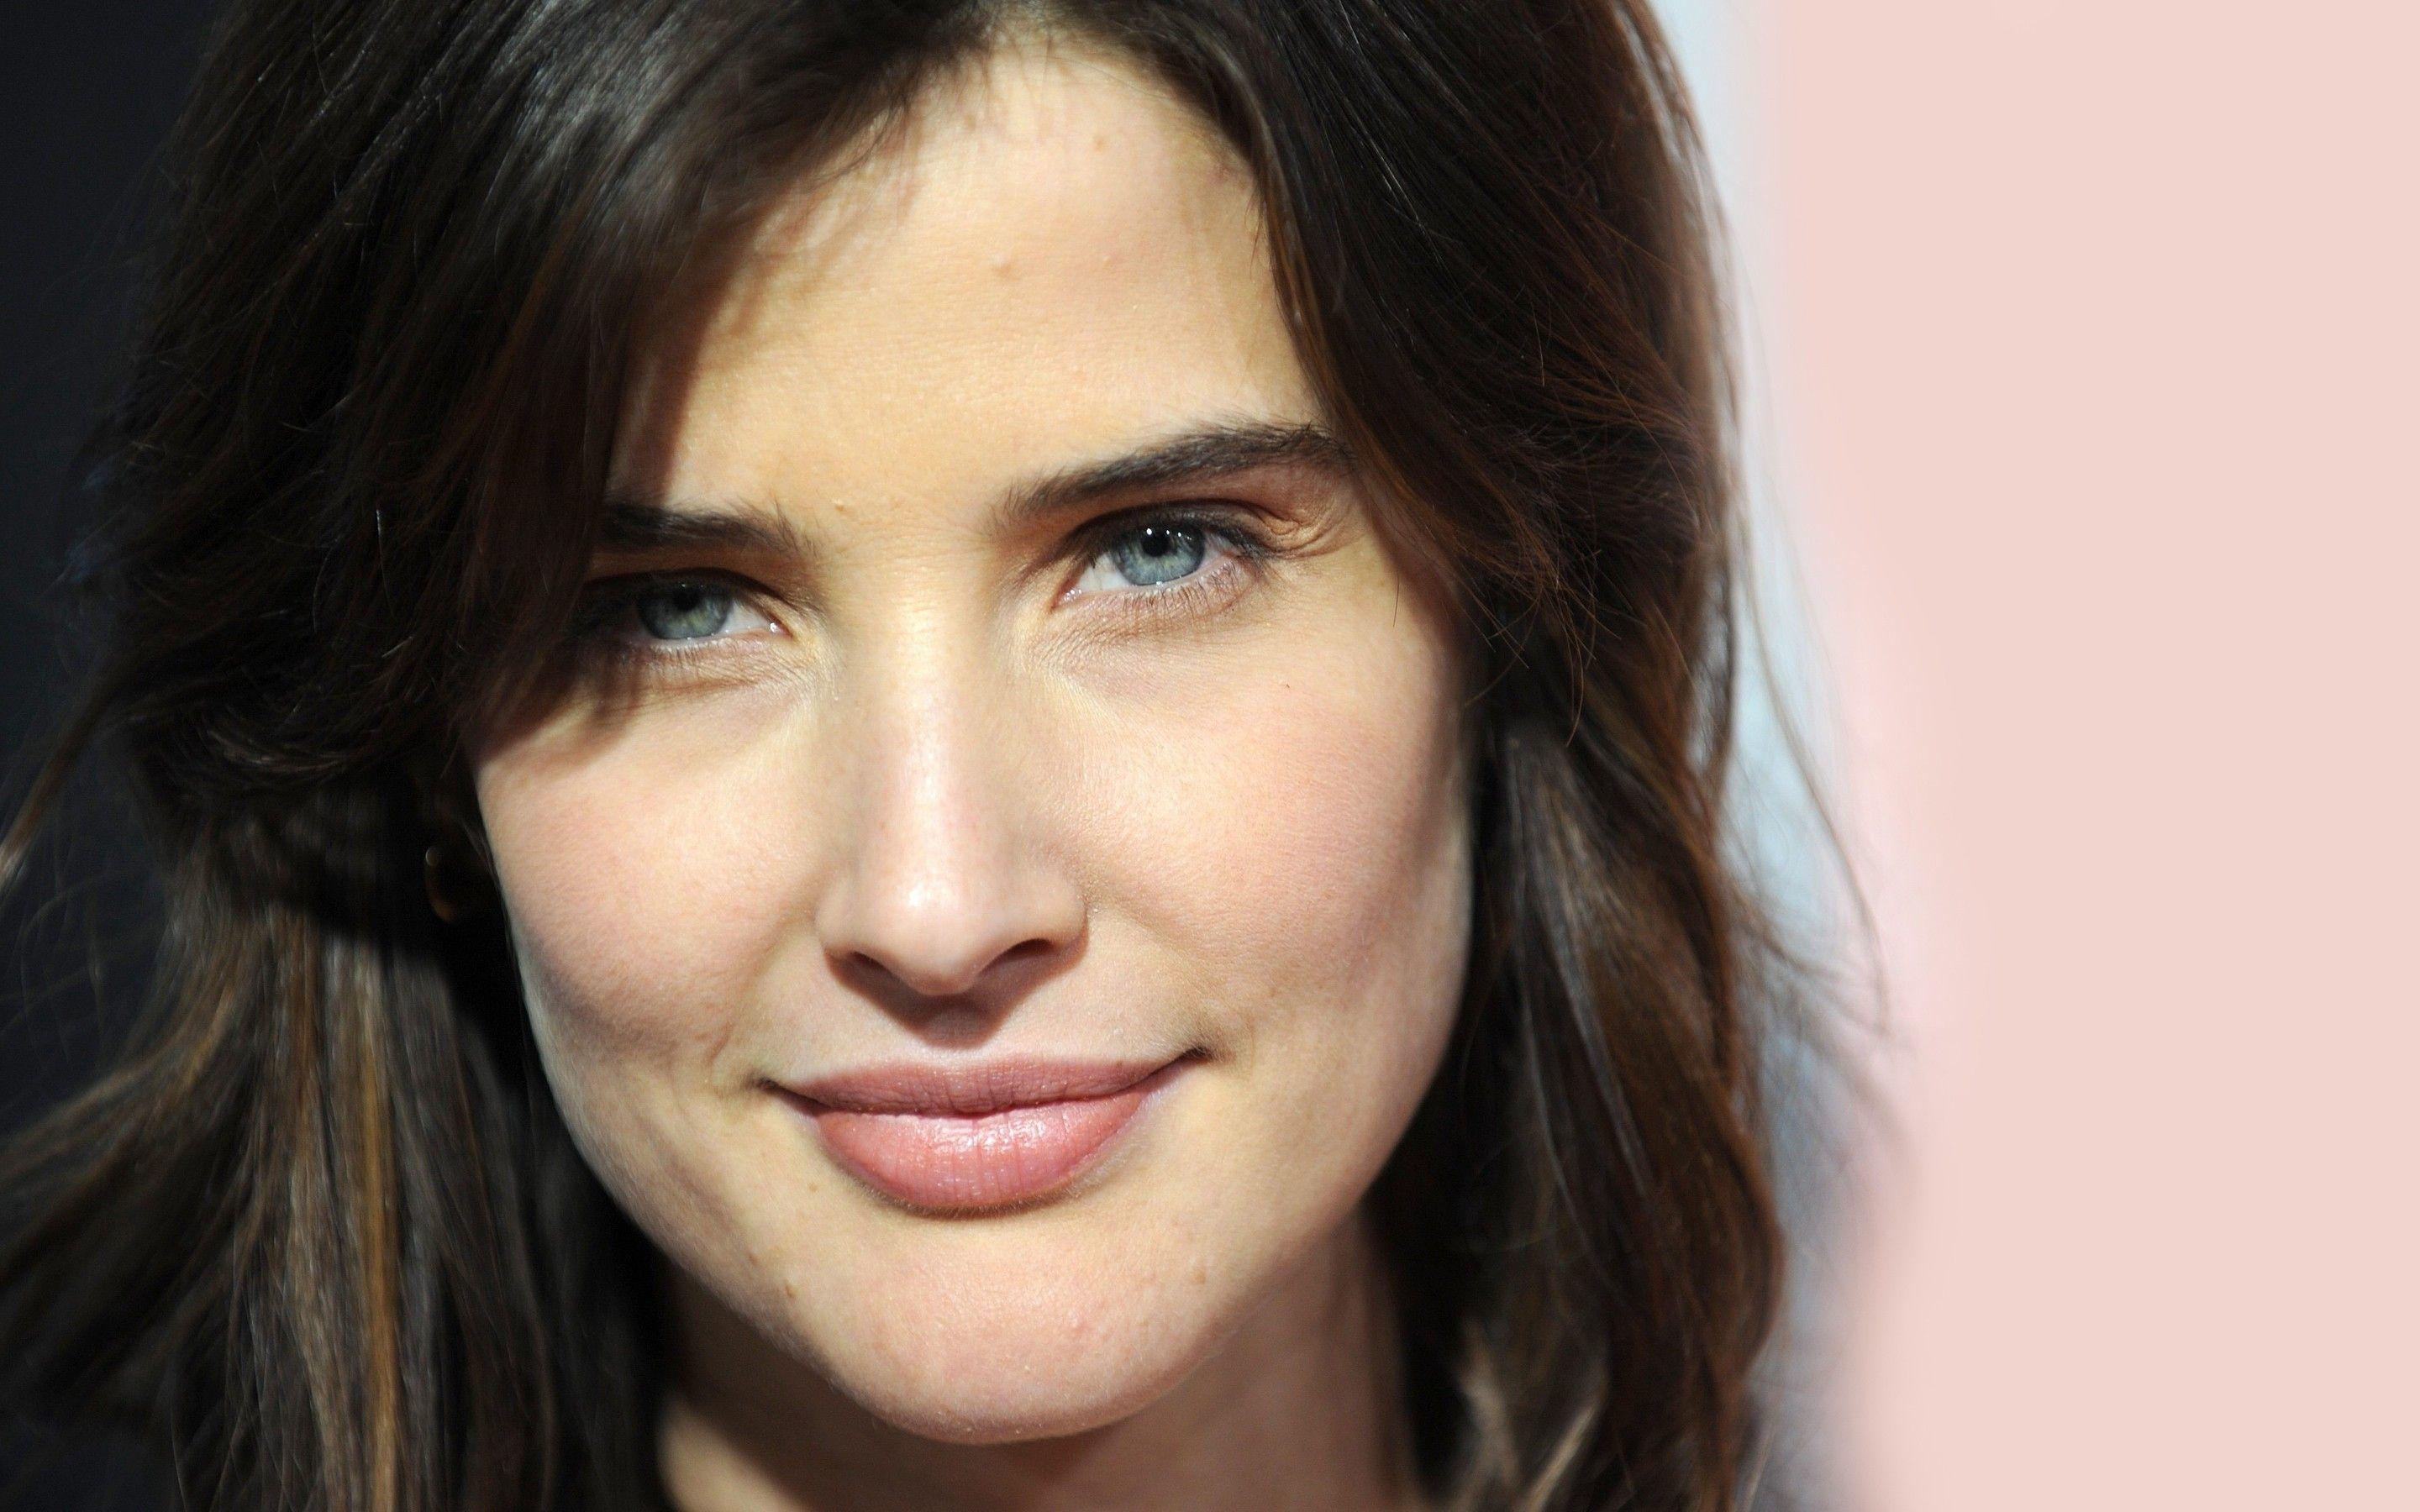 Wallpaper.wiki Cobie Smulders Background HD PIC WPC005778